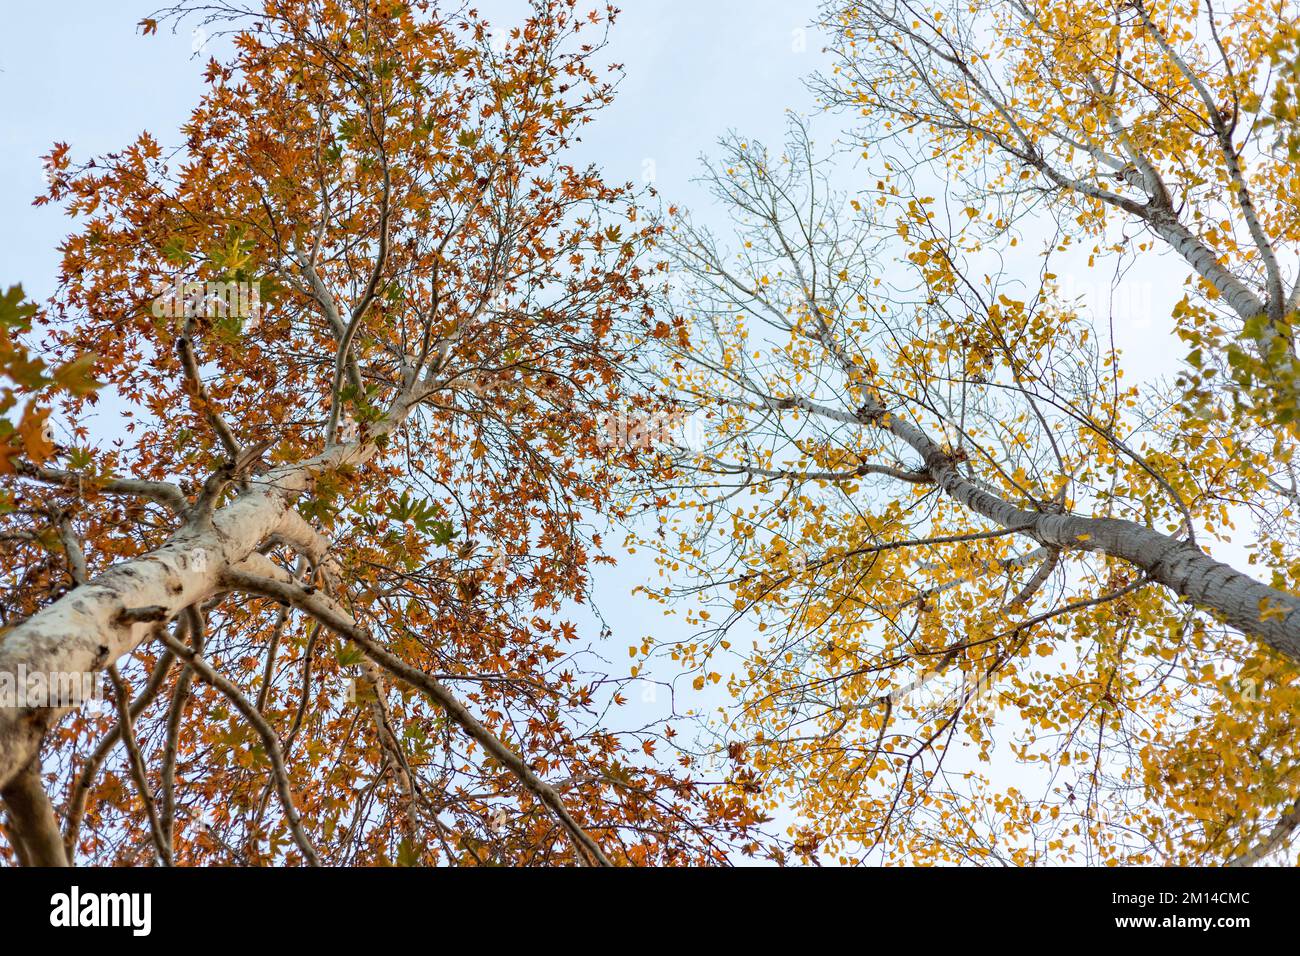 looking up to the trees from below in the autumn season Stock Photo